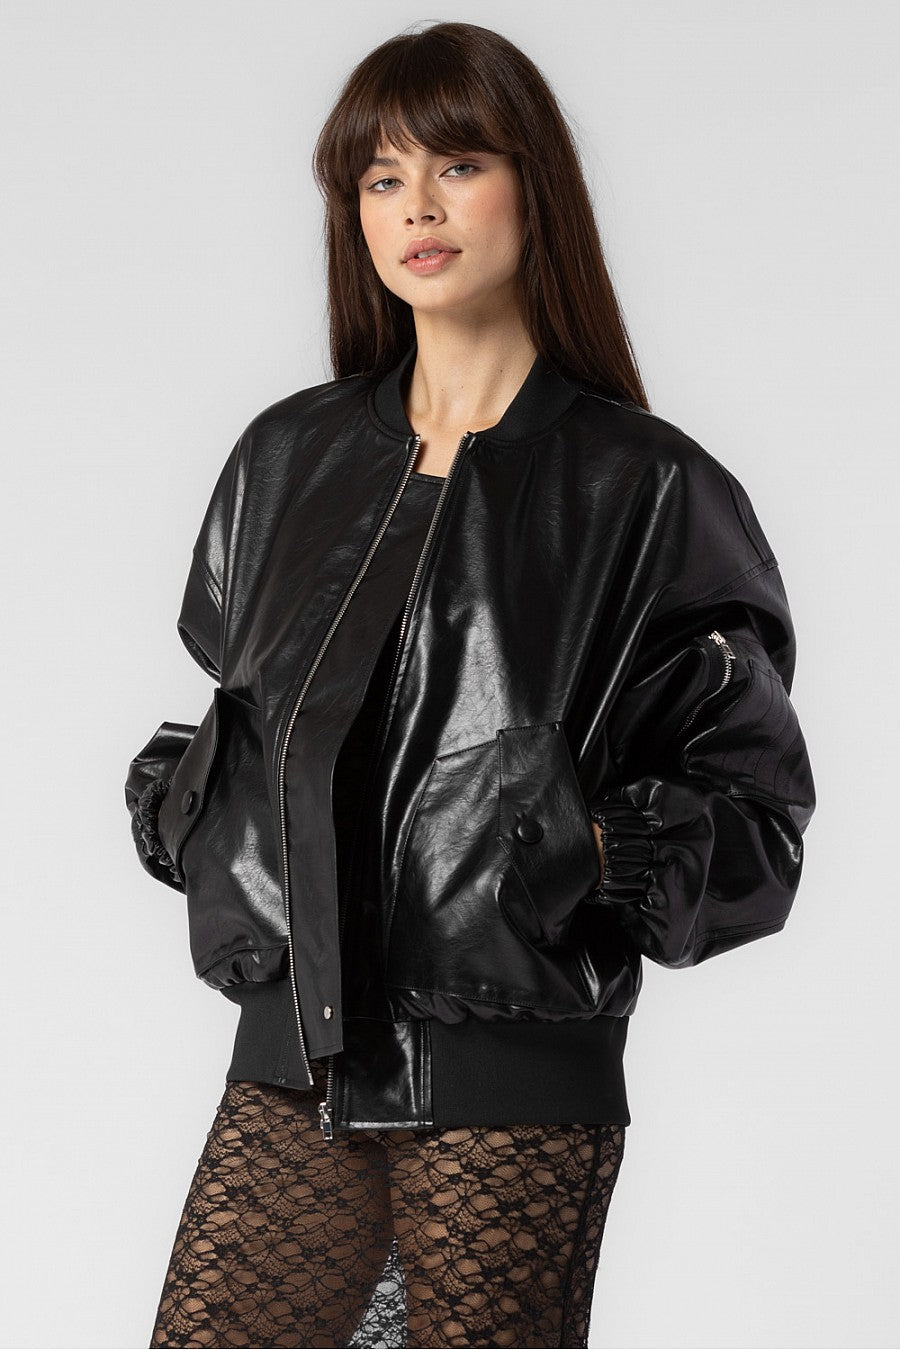 Women's Bomber Jacket: Elevate Your Style with Fashion-Forward Comfort